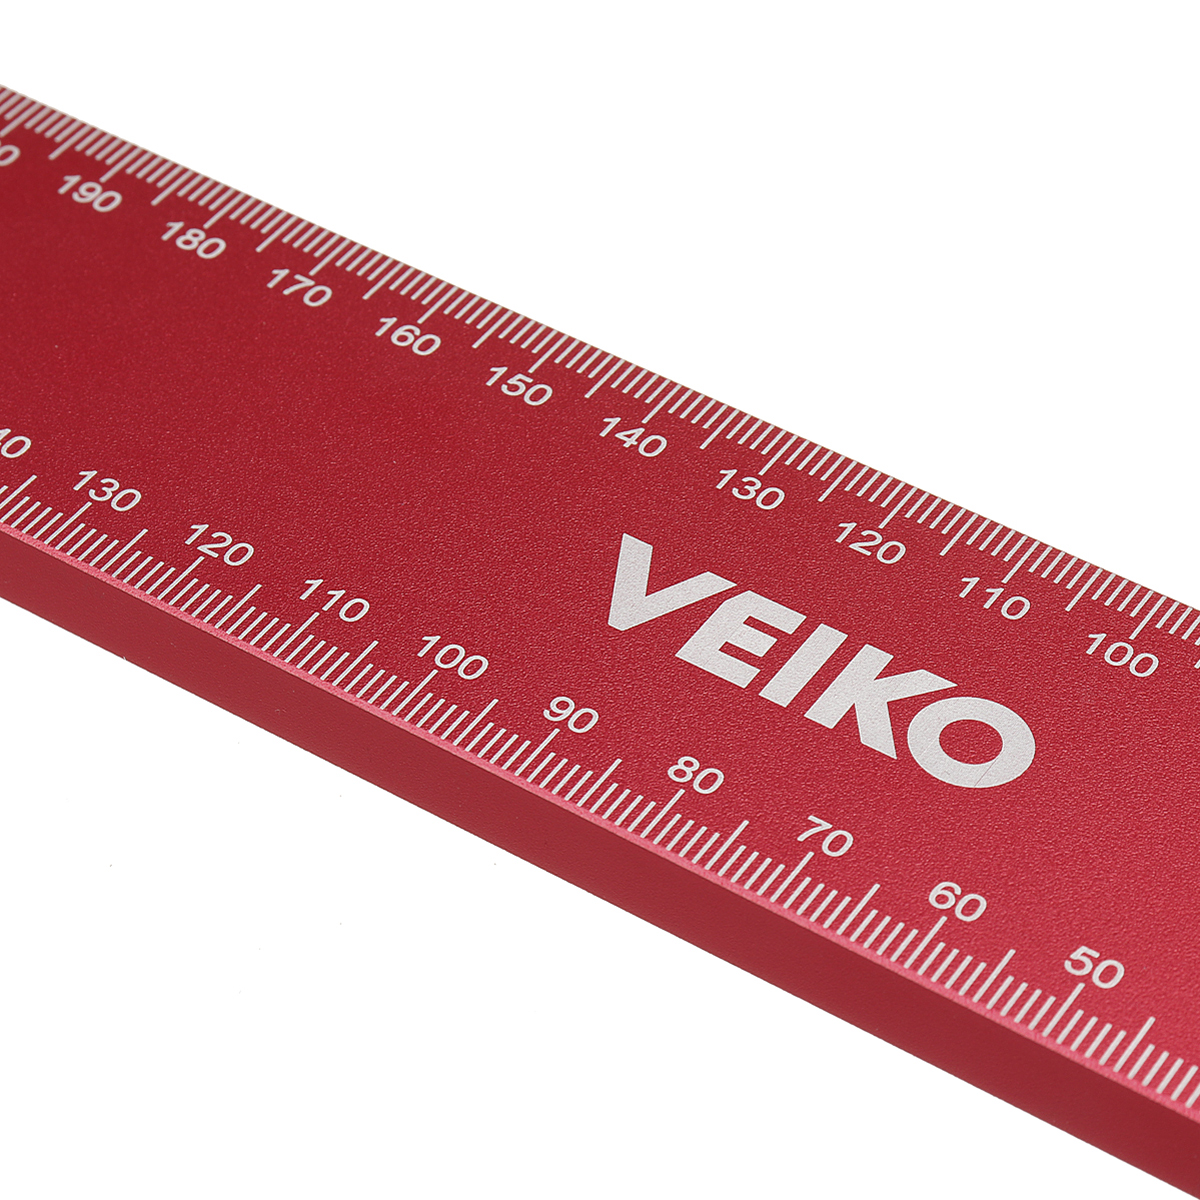 VEIKO-300x200mm-Aluminum-Alloy-Precision-Woodworking-Square-Right-Angle-Ruler-with-Base-1910992-10